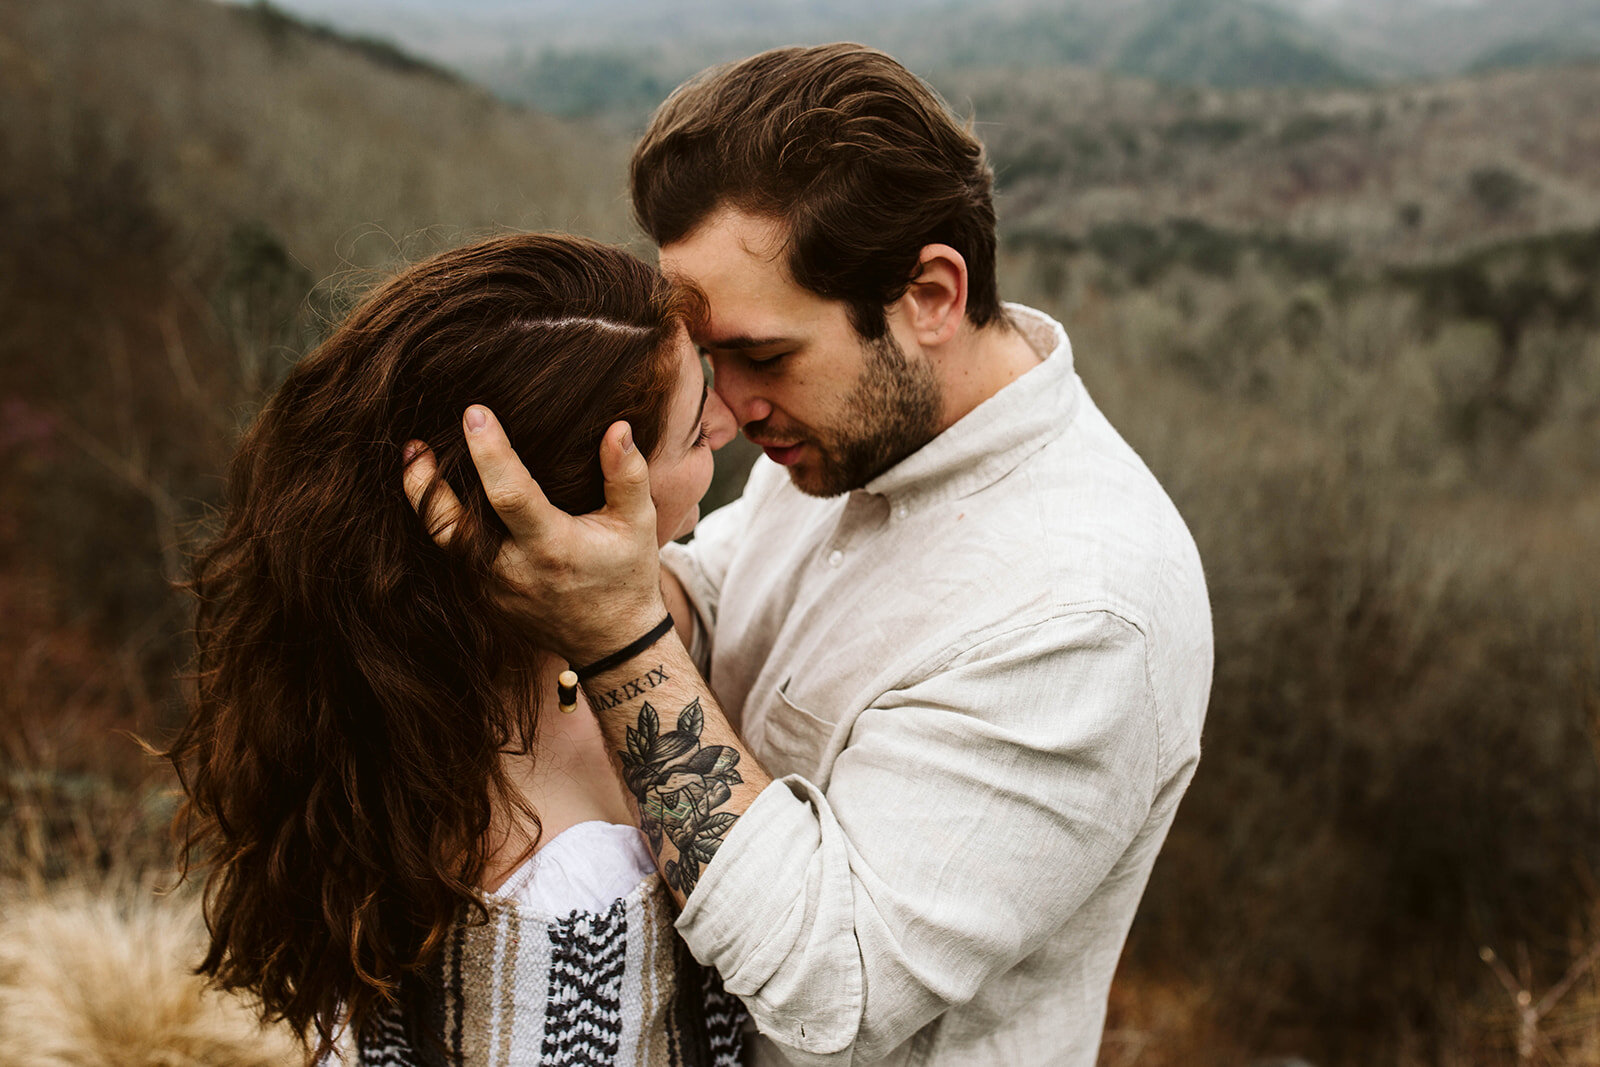 adventure-engagement-in-the-great-smoky-mountains-chattanooga-elopement-photographer5Y6A5726_websize.jpg